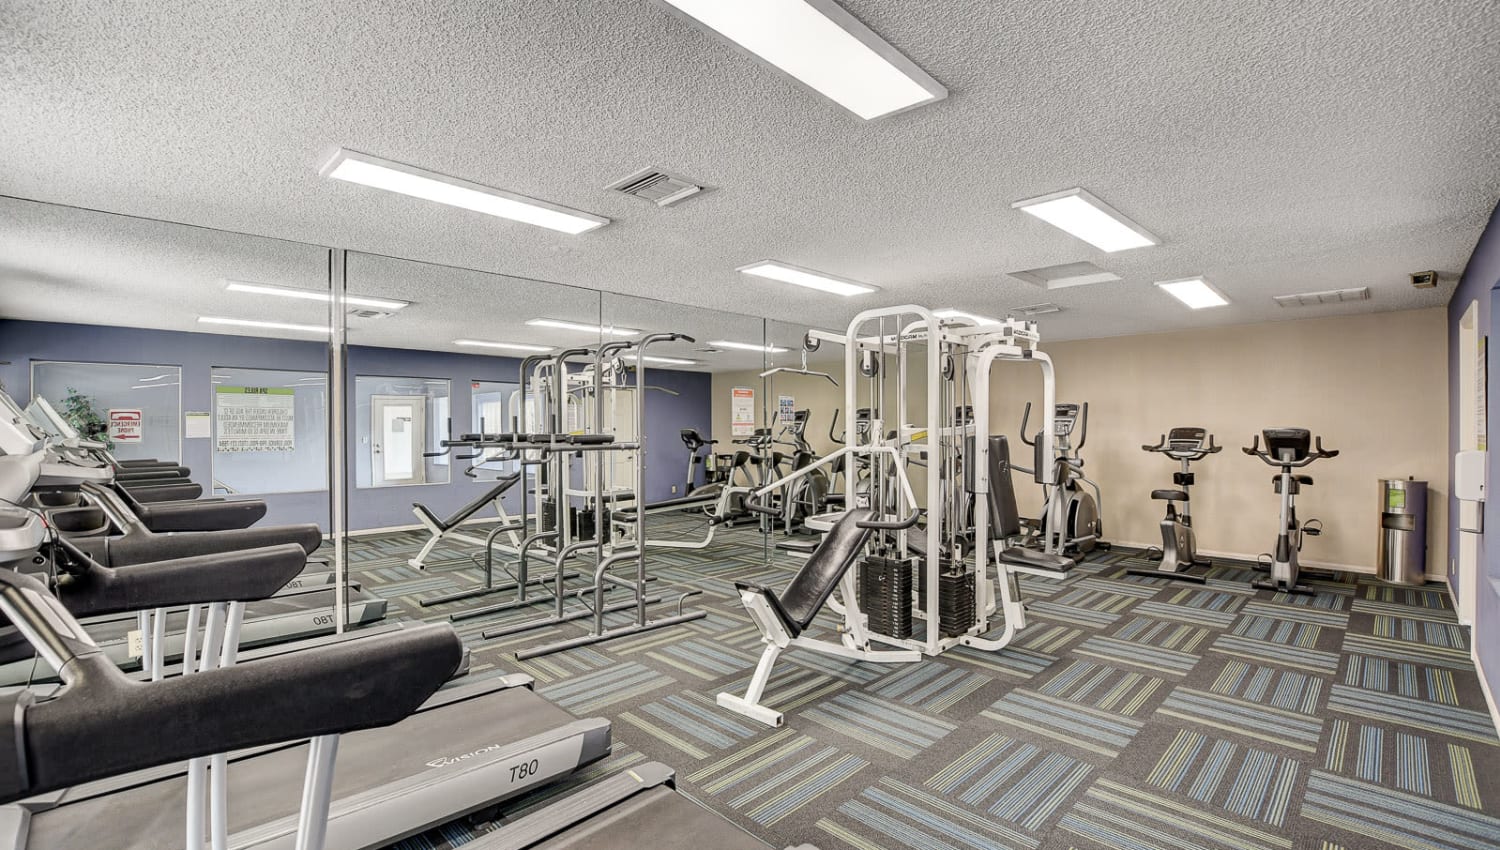 Fitness center at Breakers Apartments in Las Vegas, Nevada